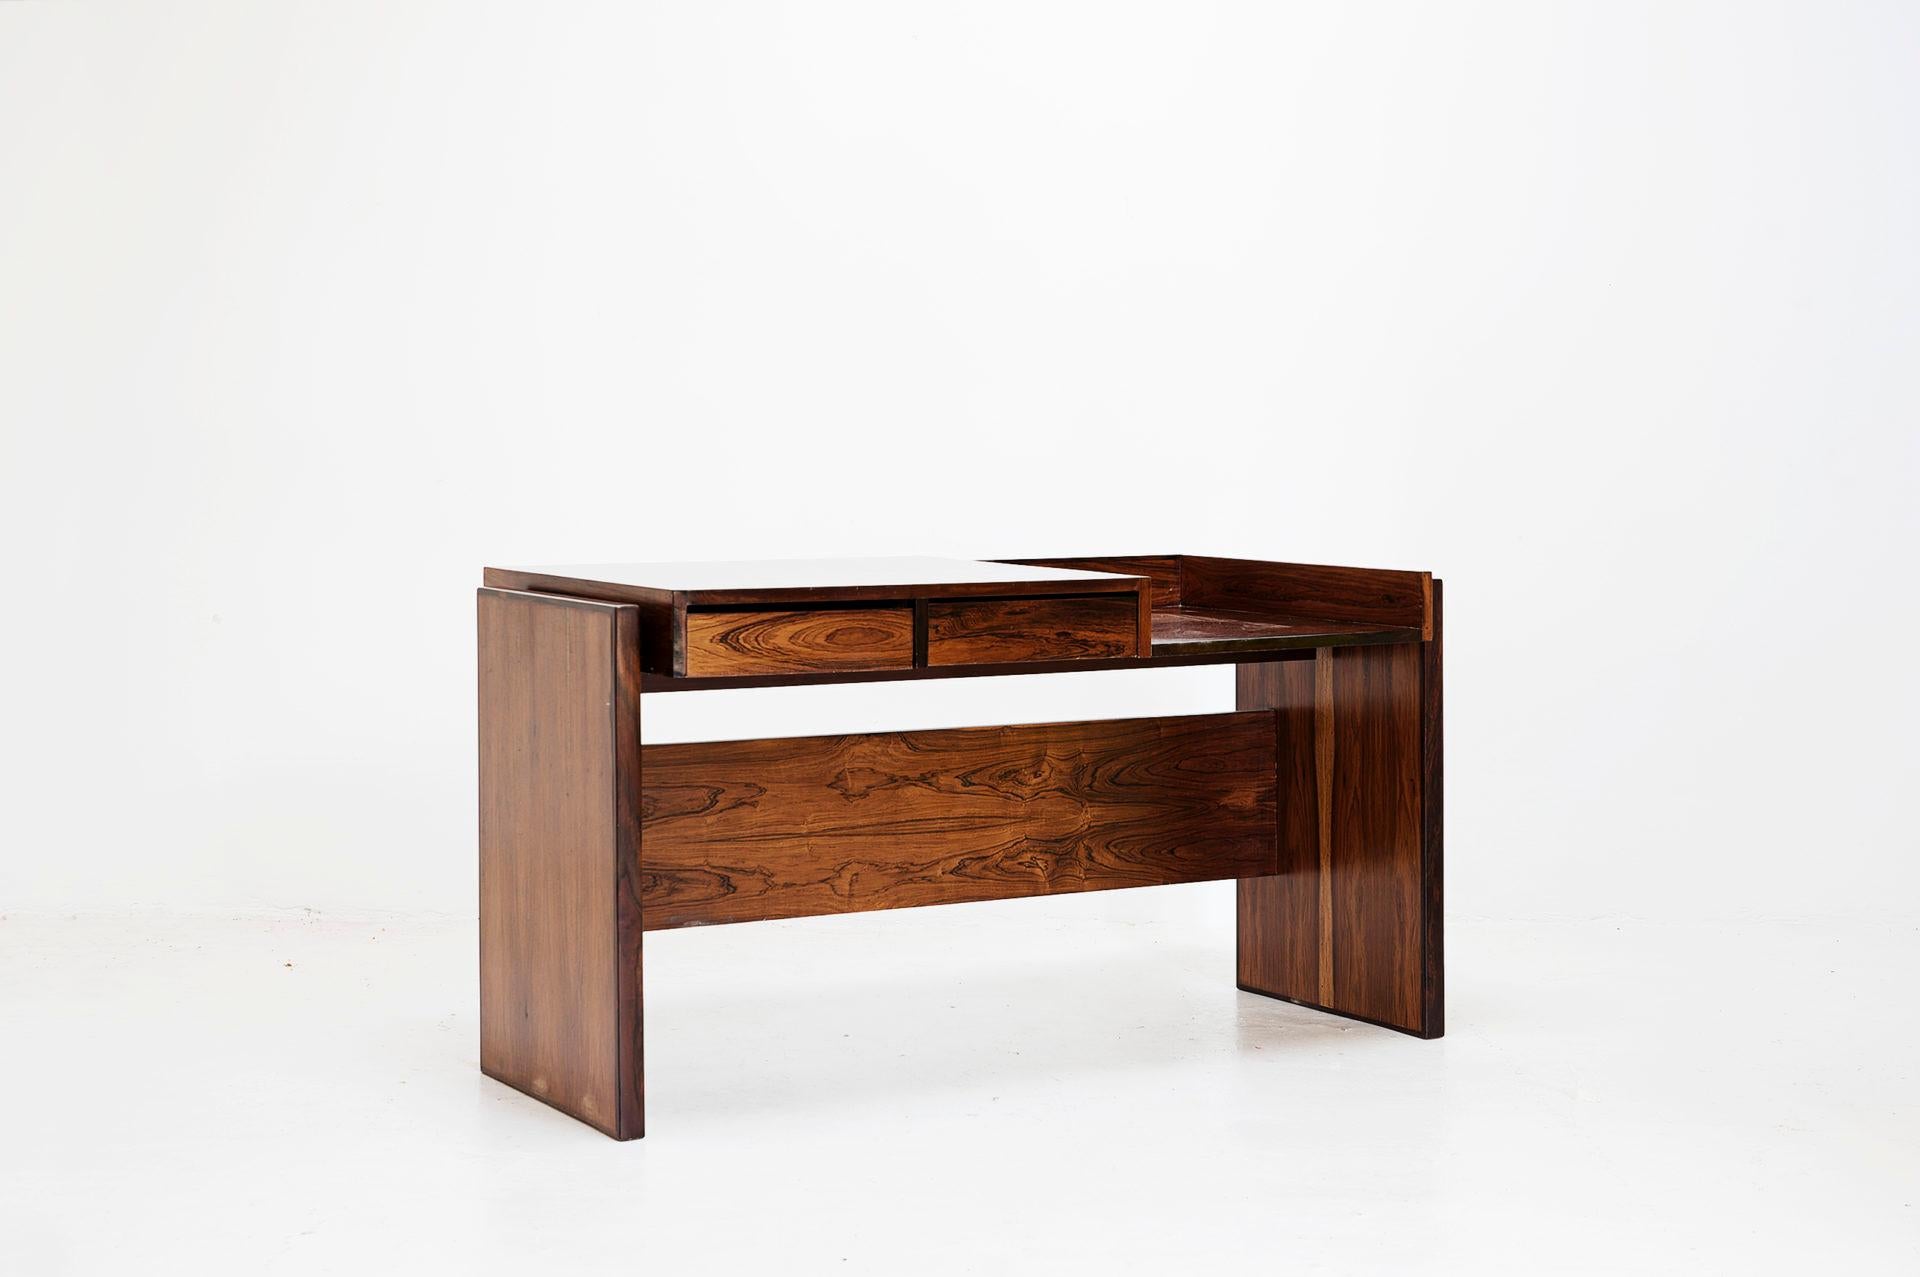 Desk
Created for the offices of Bloch Editores, Sao PAulo
Brazil, 1966
Jacaranda (rosewood) wood

Measurements
145 cm x 70 cm x 75h cm
57 in x 27,55 in x 29,52h in

Details
Paqule of Patrimony with the number 